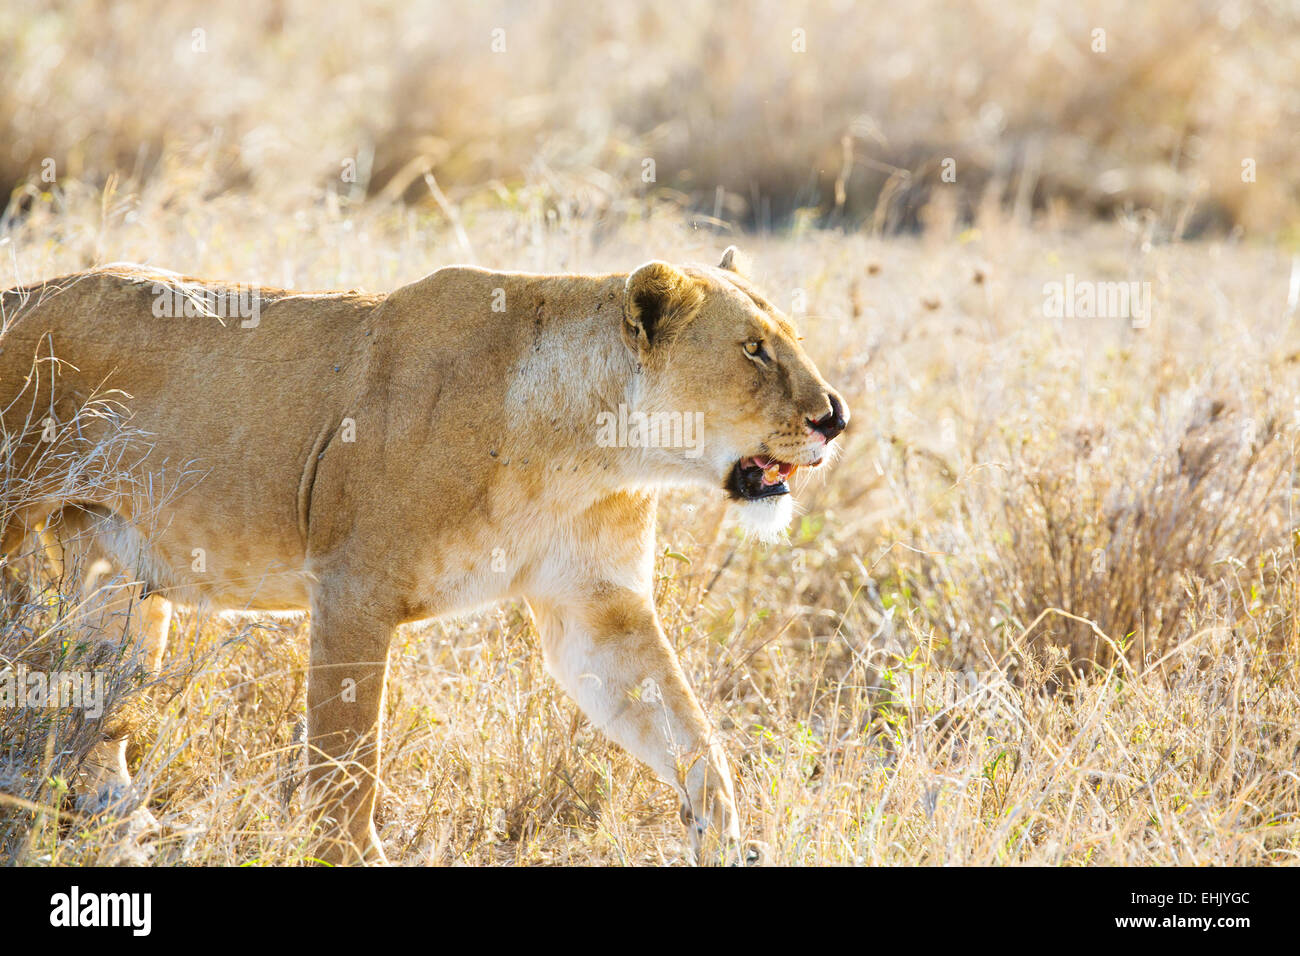 Close up of lioness with a nose injury in Serengeti. Photo from Tanzania, Africa. Stock Photo